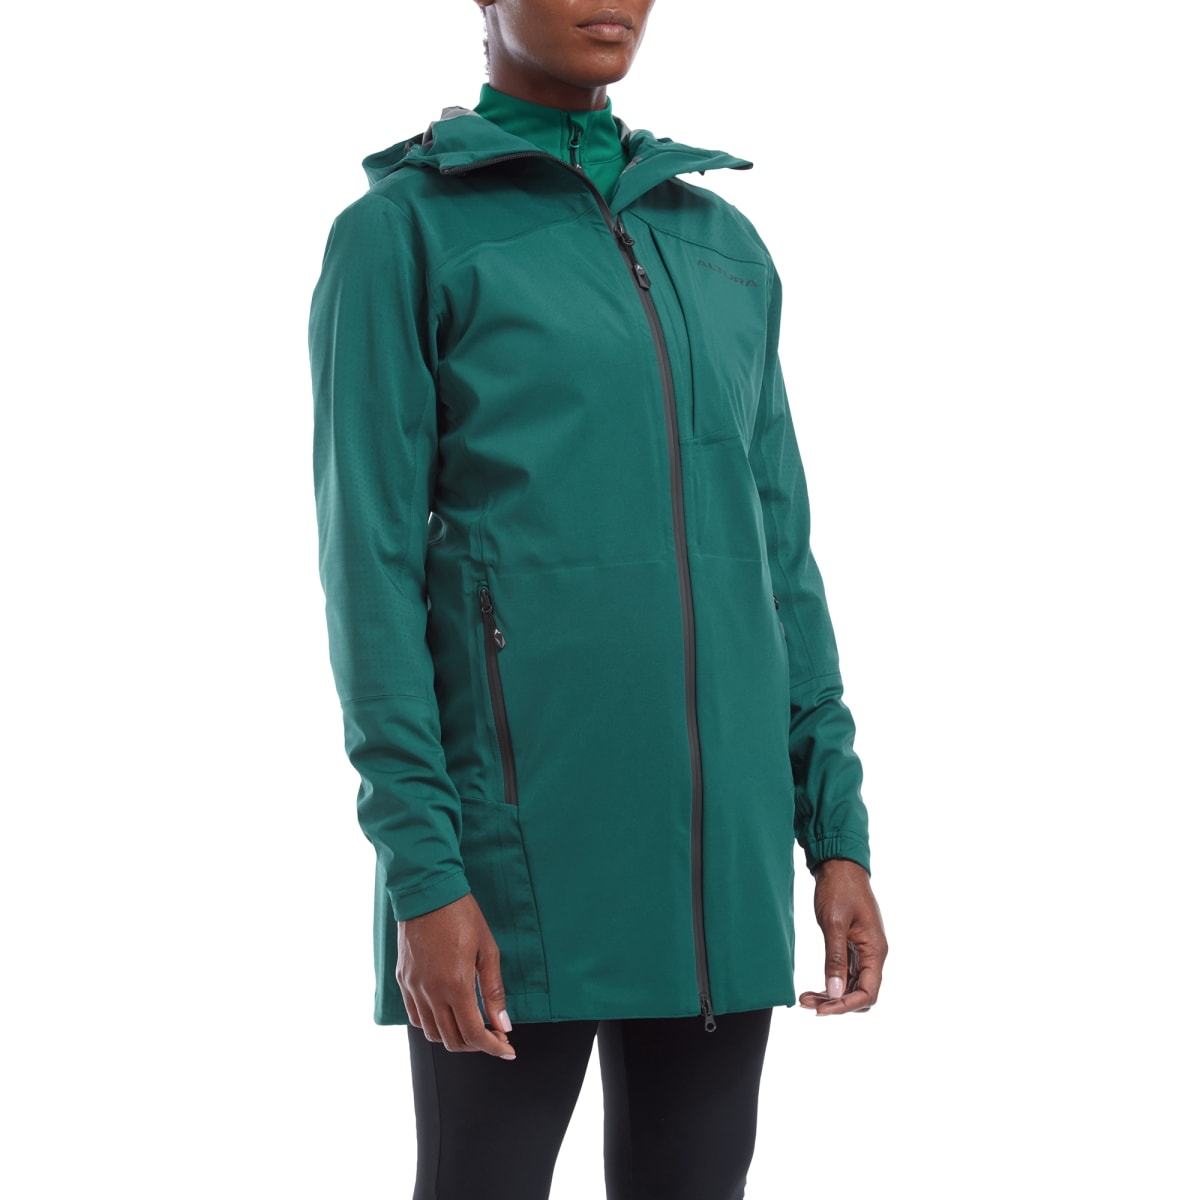 Cycles UK Altura  Nightvision Zephyr Womens Stretch Jacket 8 GREEN/TEAL